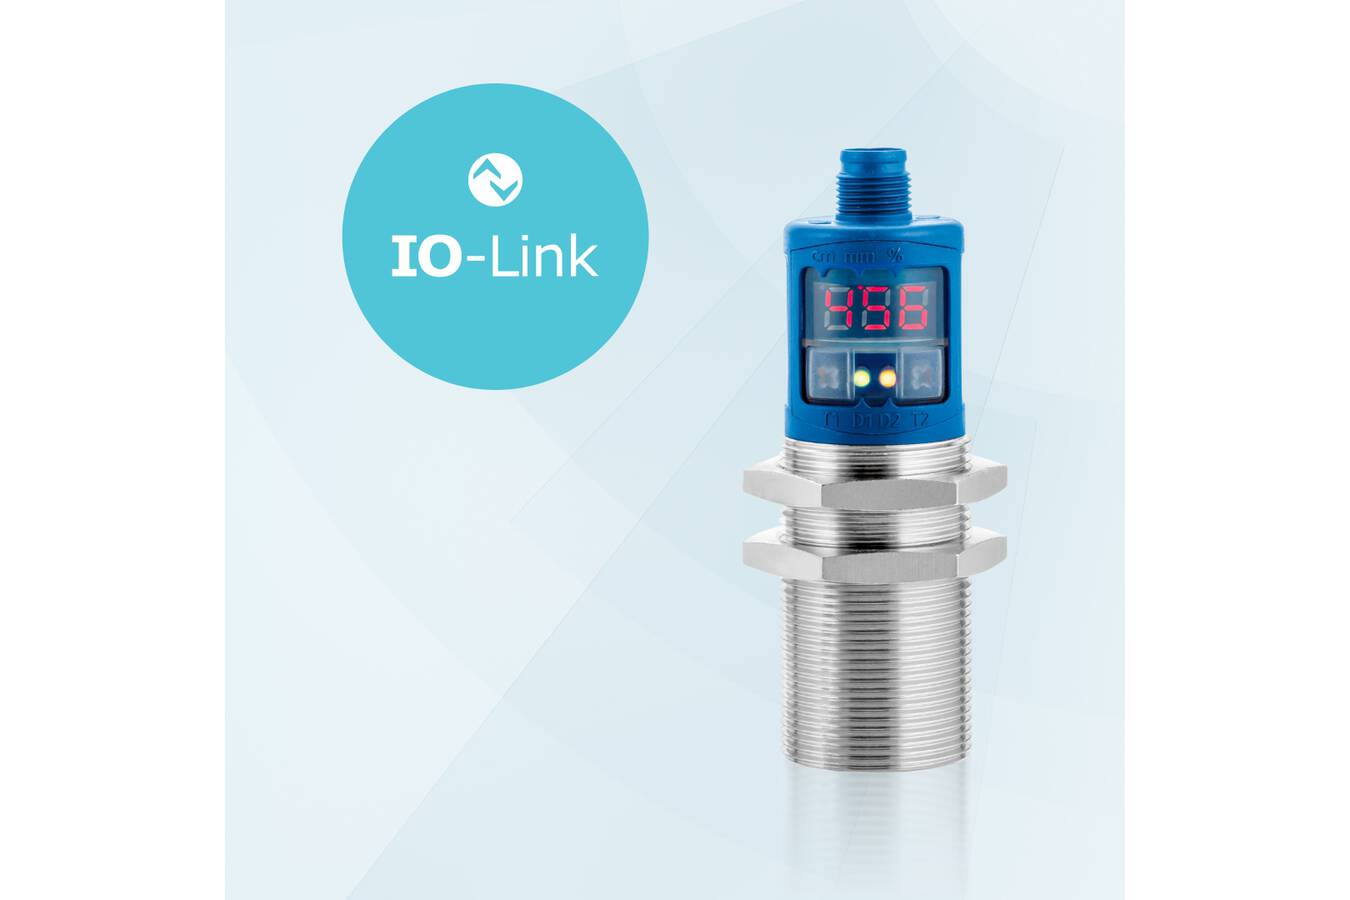 crm+ sensor now available with IO-Link